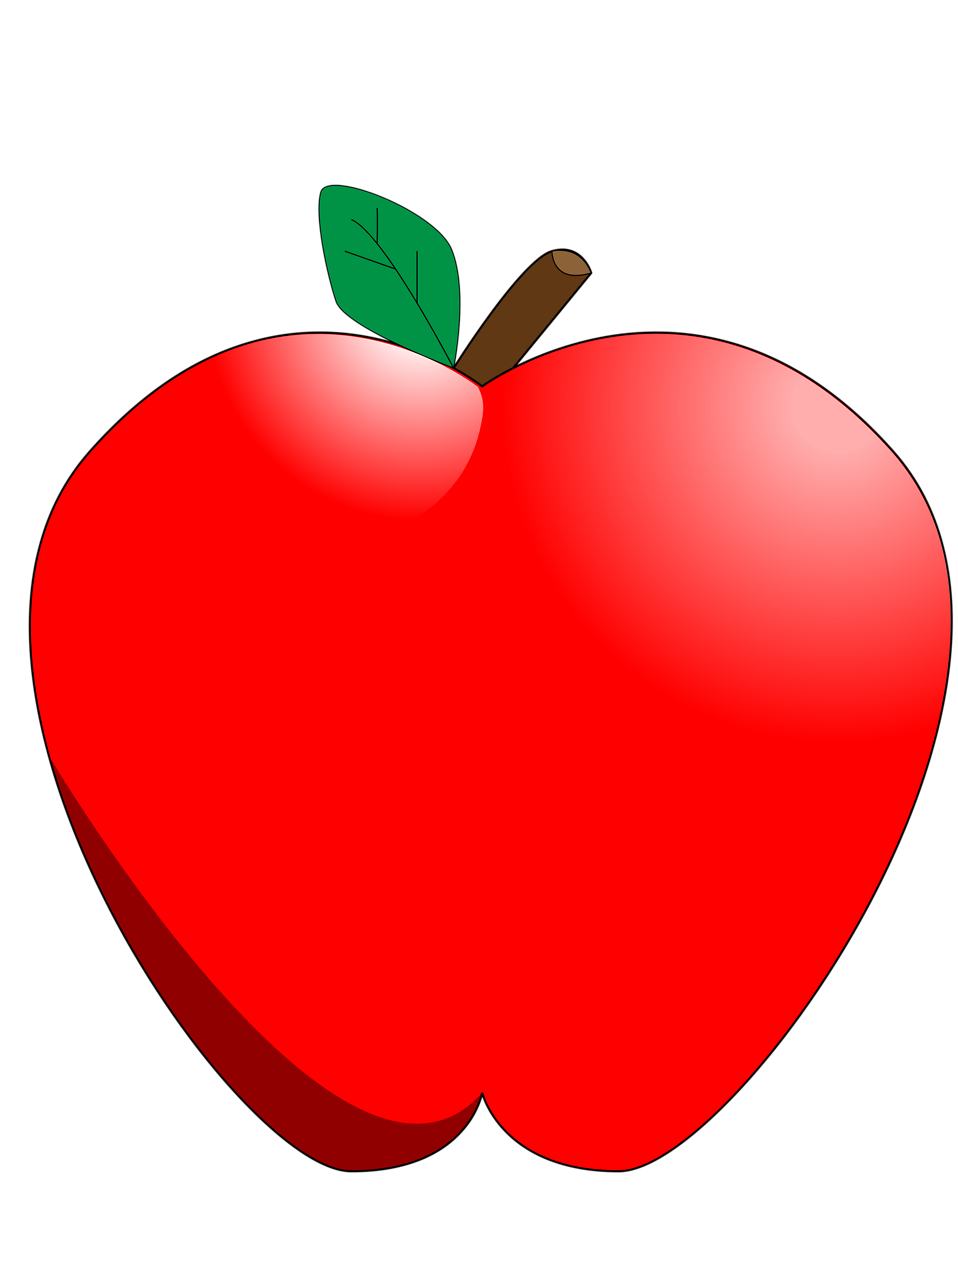 Apple clipart background.